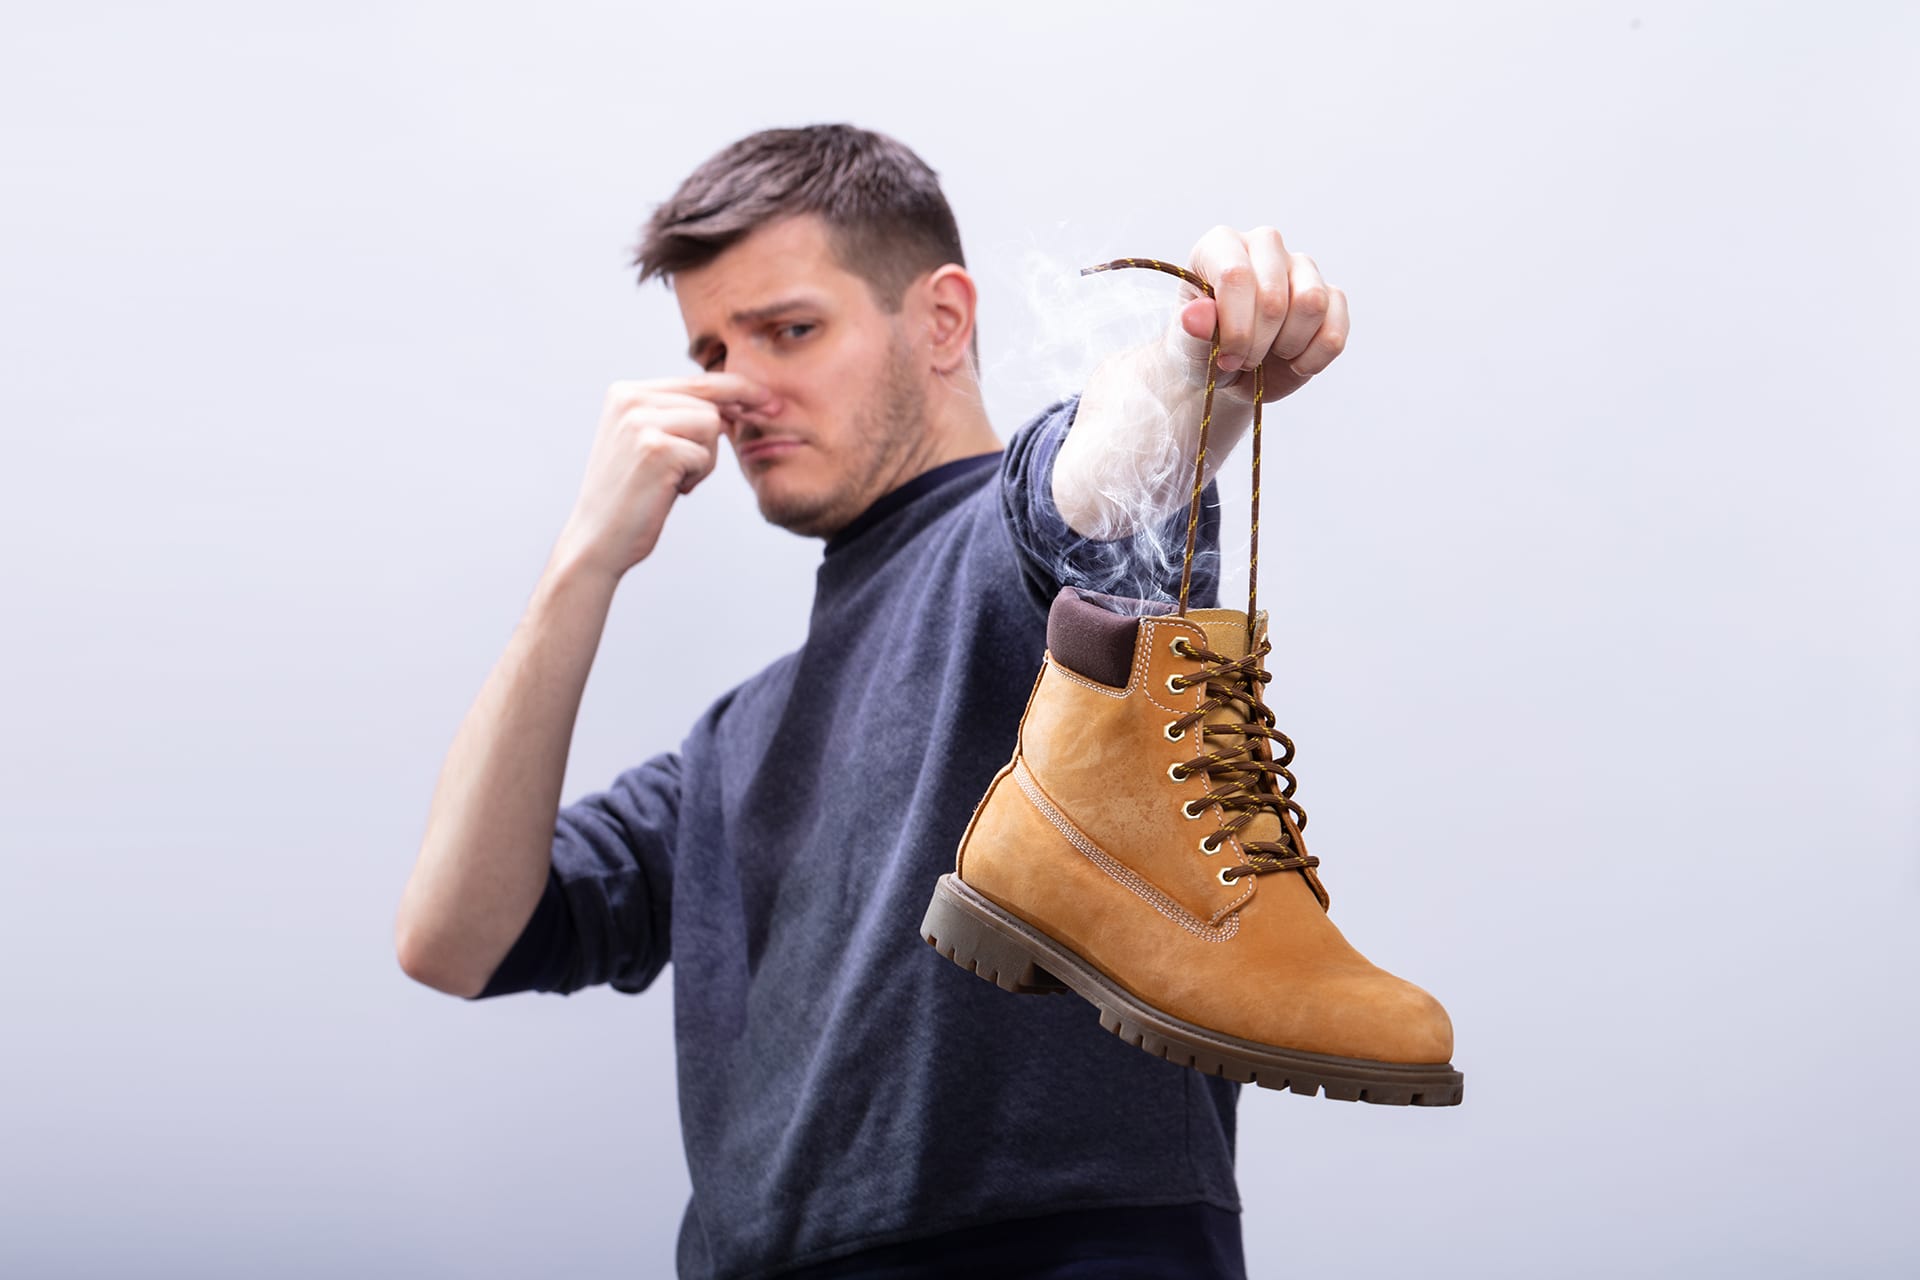 Man Covering His Nose While Holding Stinky Shoe